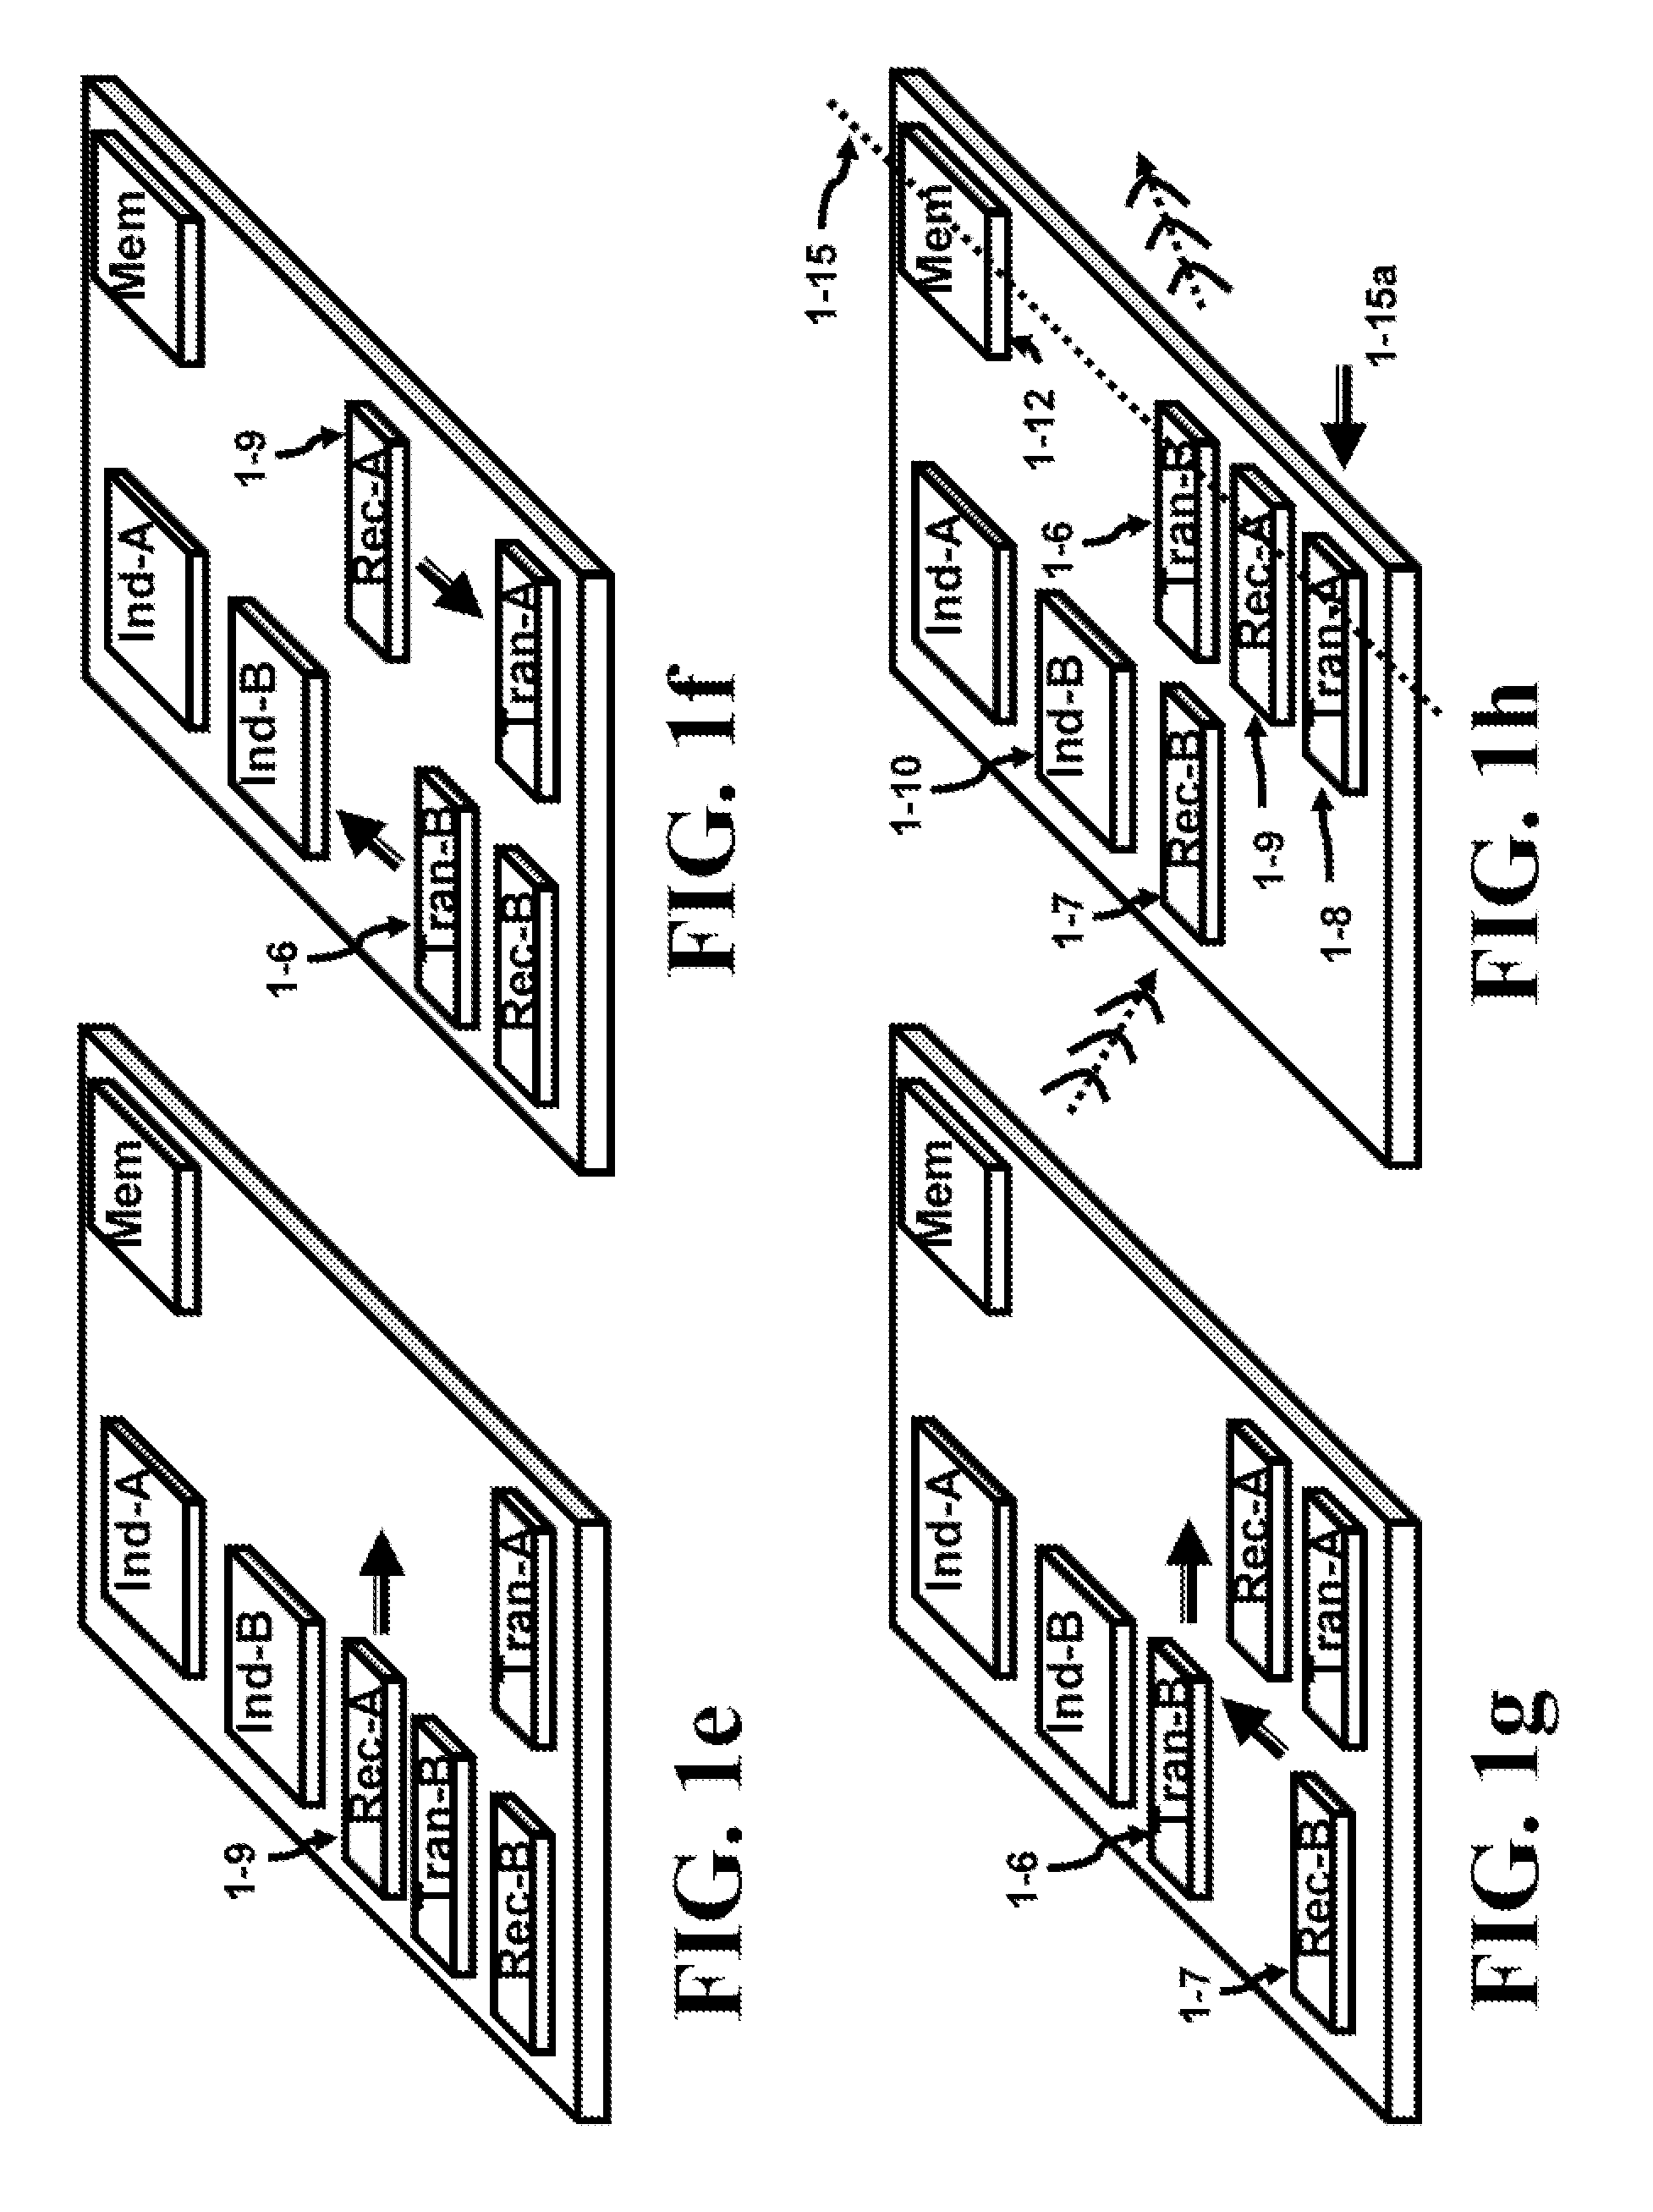 Levitating substrate being charged by a non-volatile device and powered by a charged capacitor or bonding wire